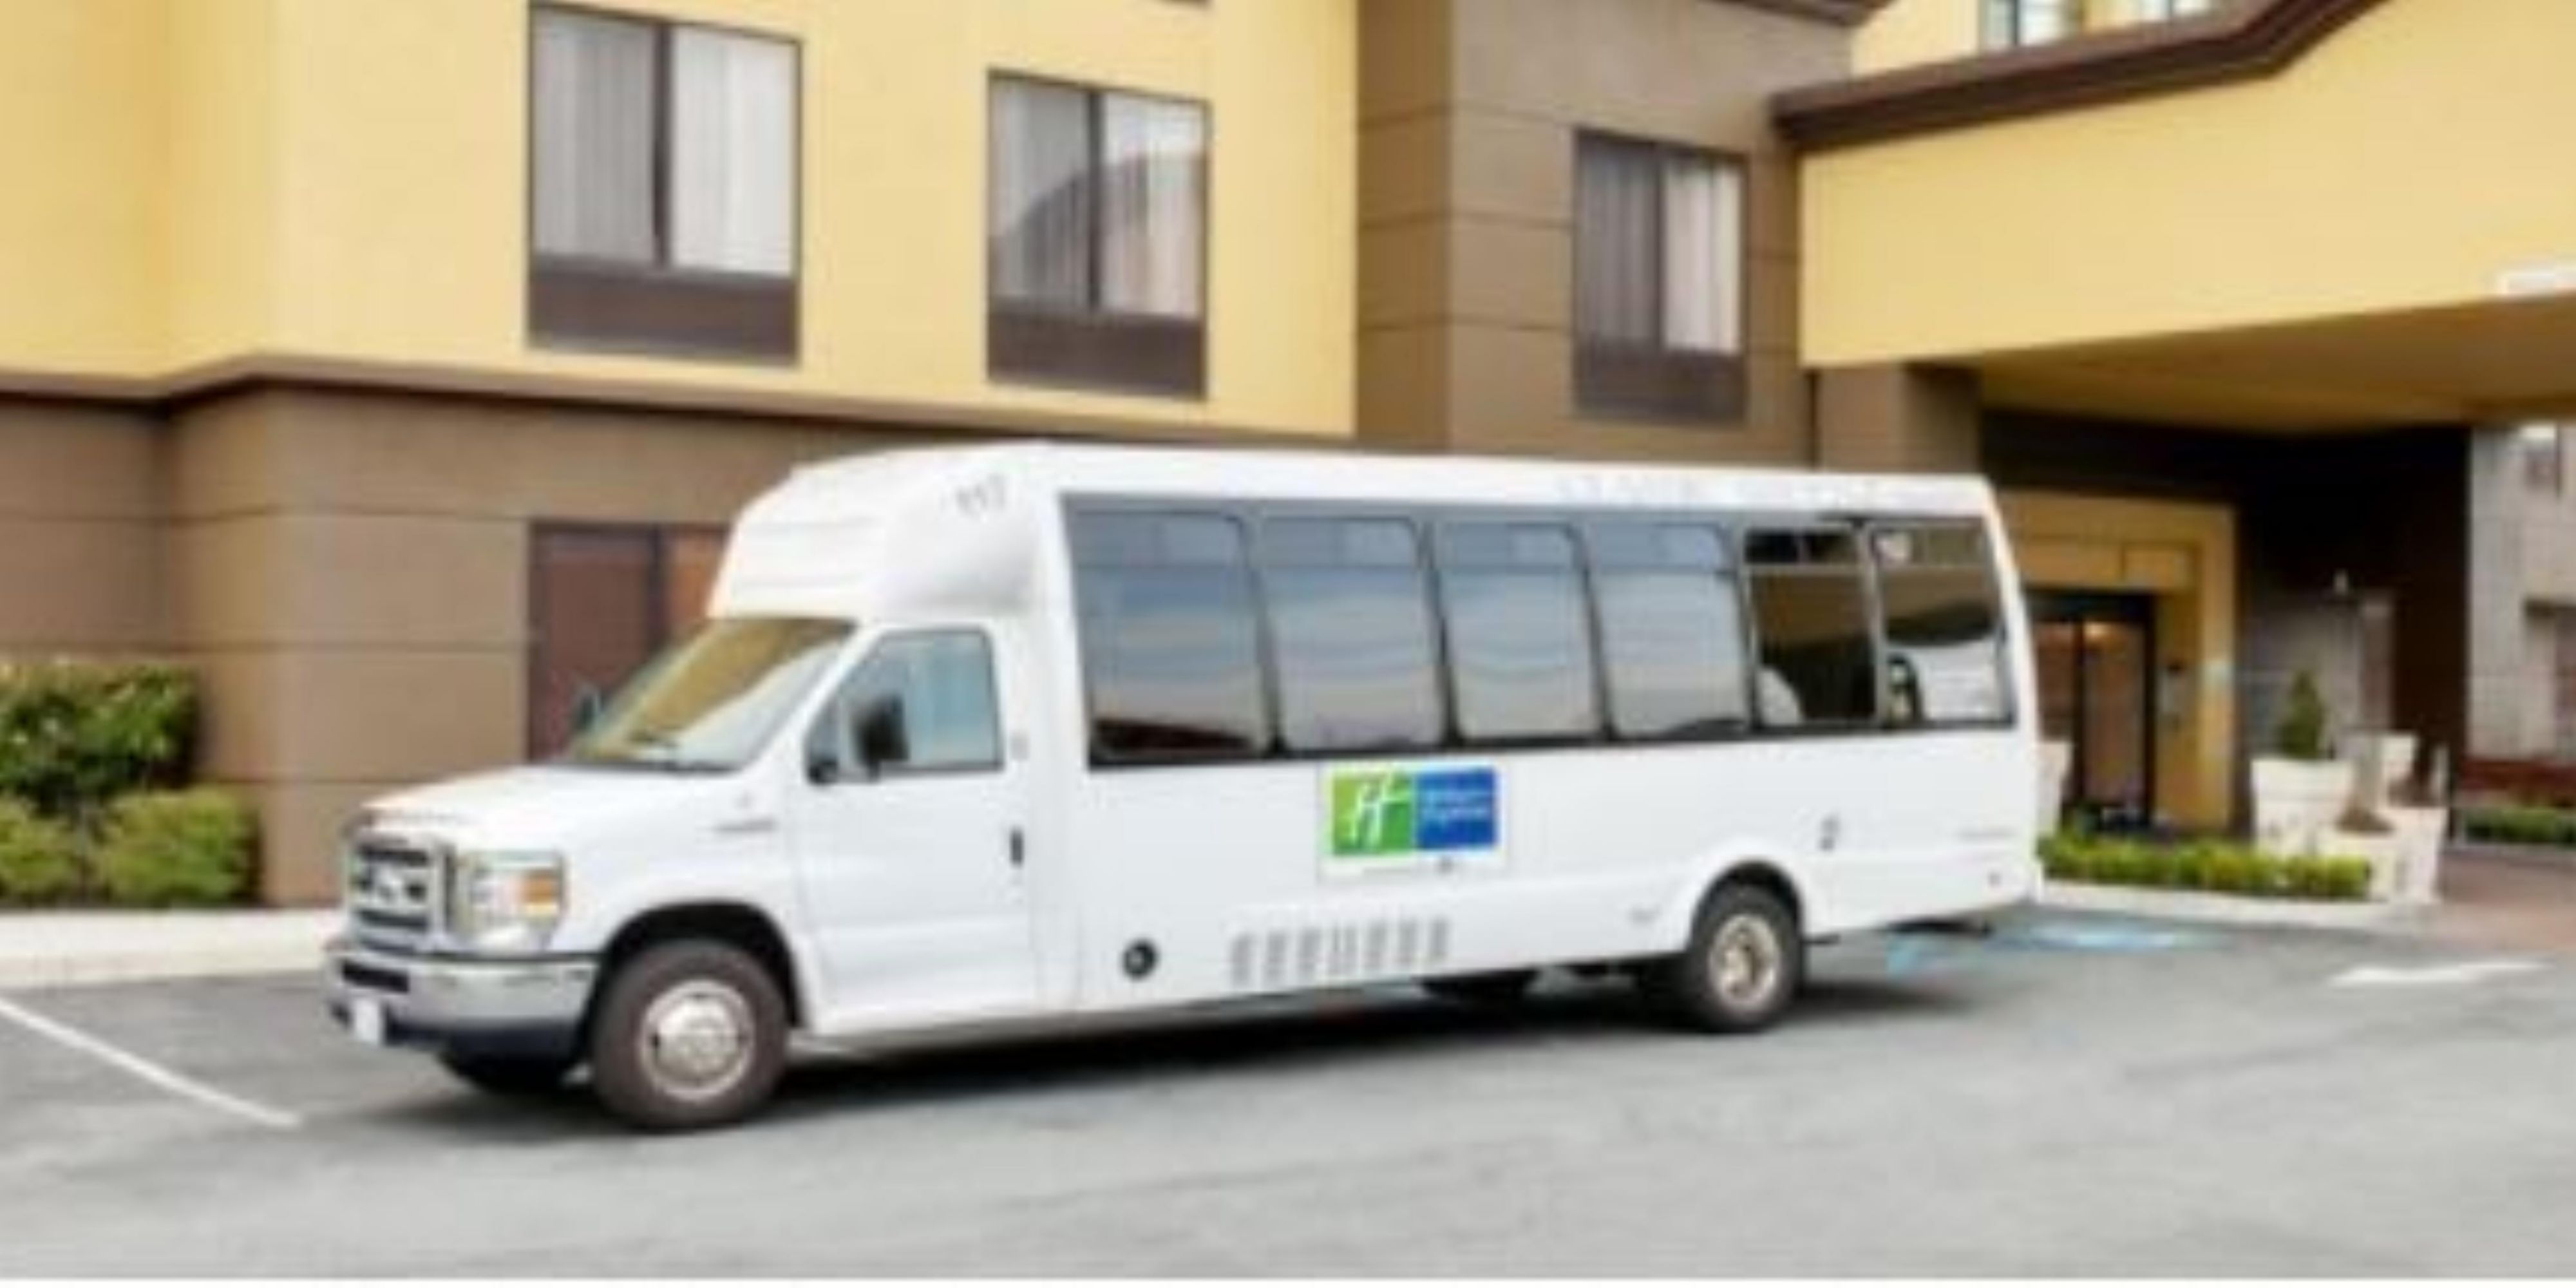 Complimentary shuttle service for San Francisco International Airport. 
Limited Hours 5a to 9:20am & 5pm to 10:20pm